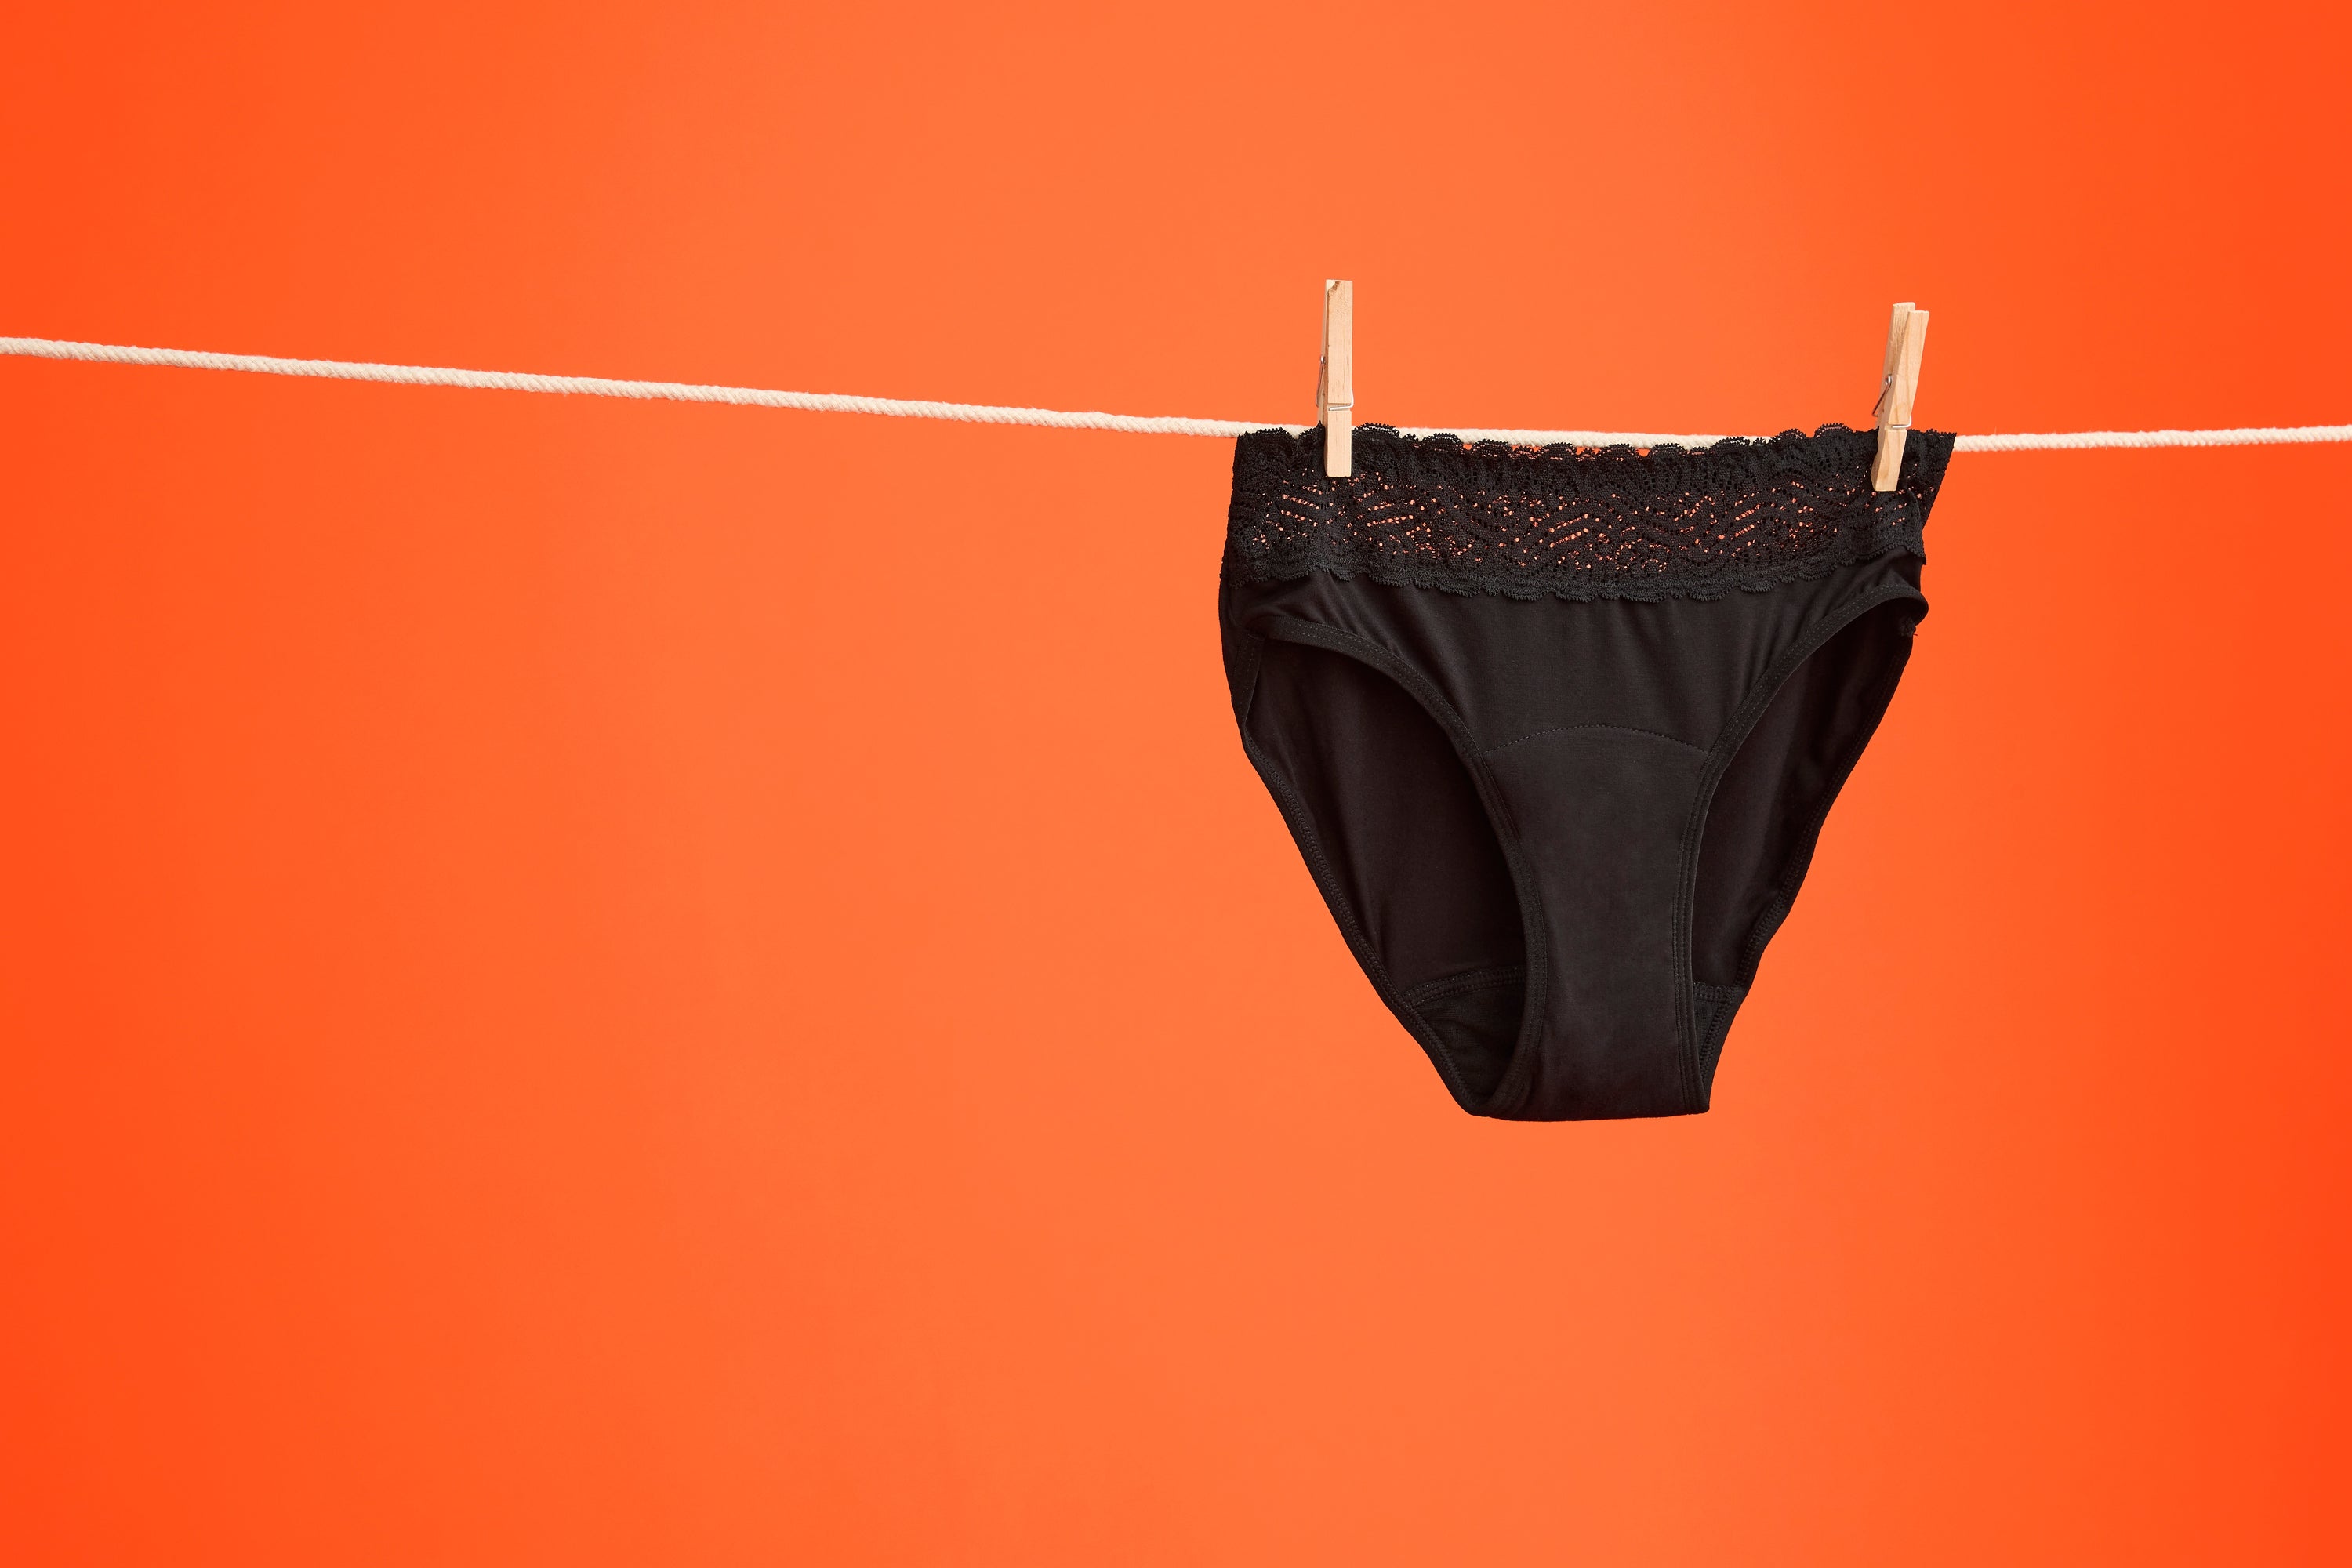 Always disposable period panties have changed the way I sleep, in